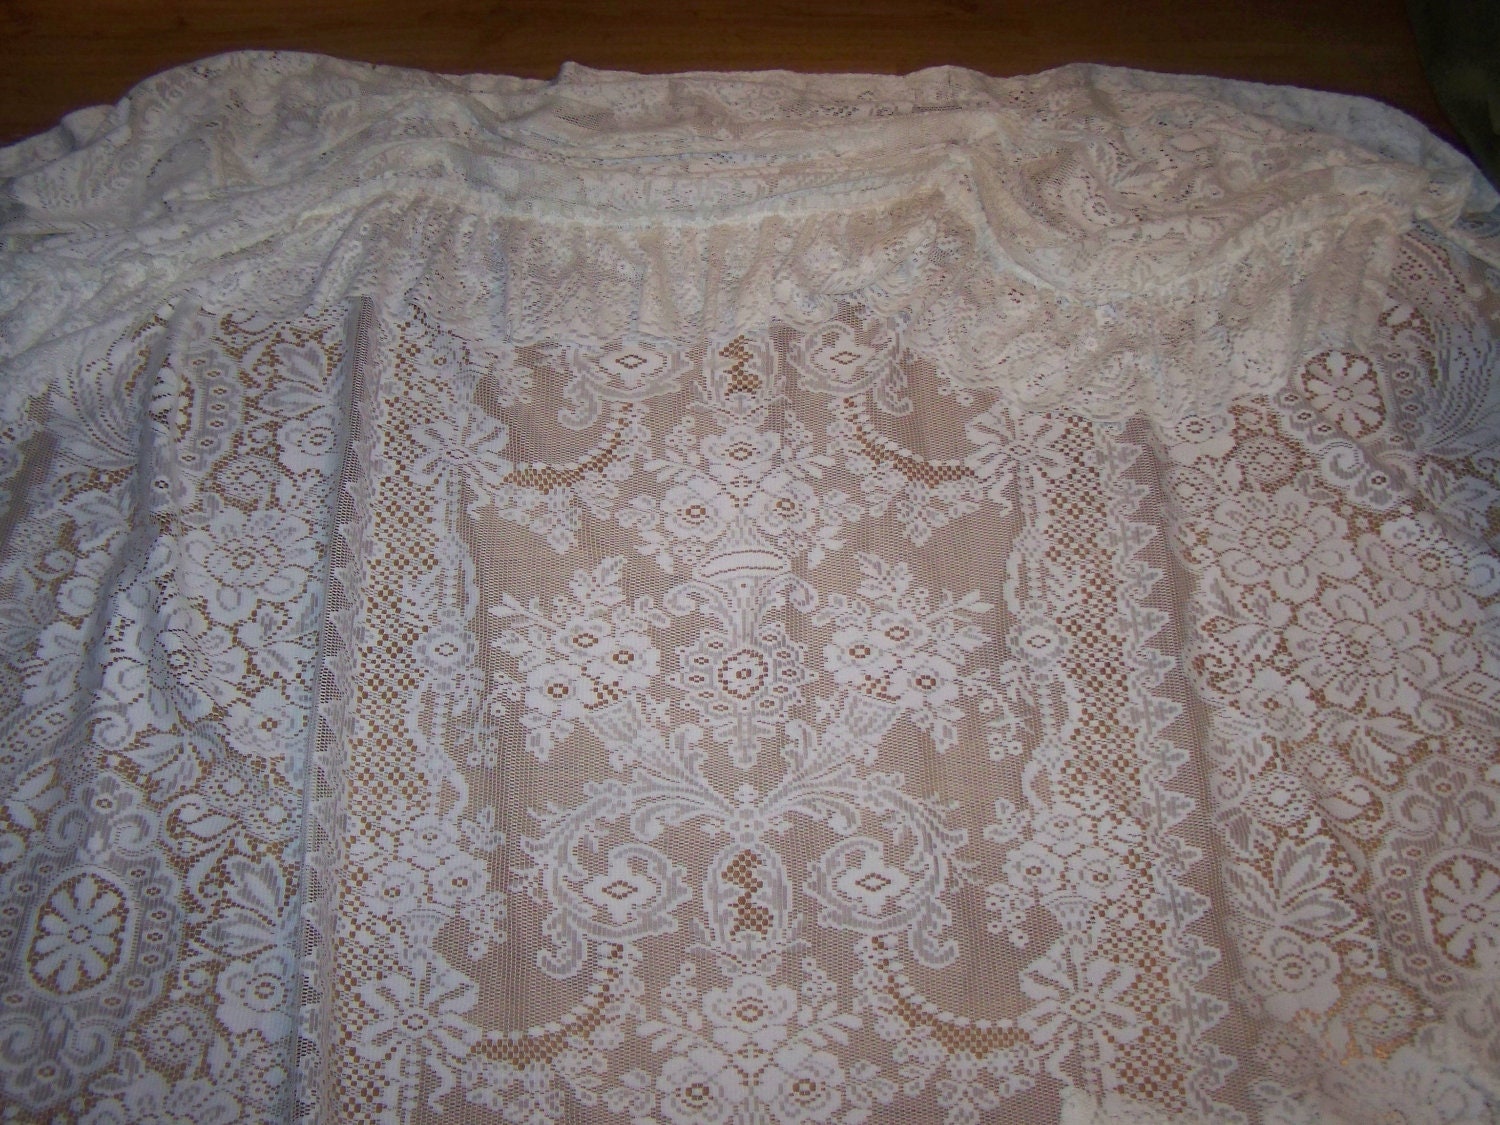 Ivory vintage lace Victorian style shower curtain draped